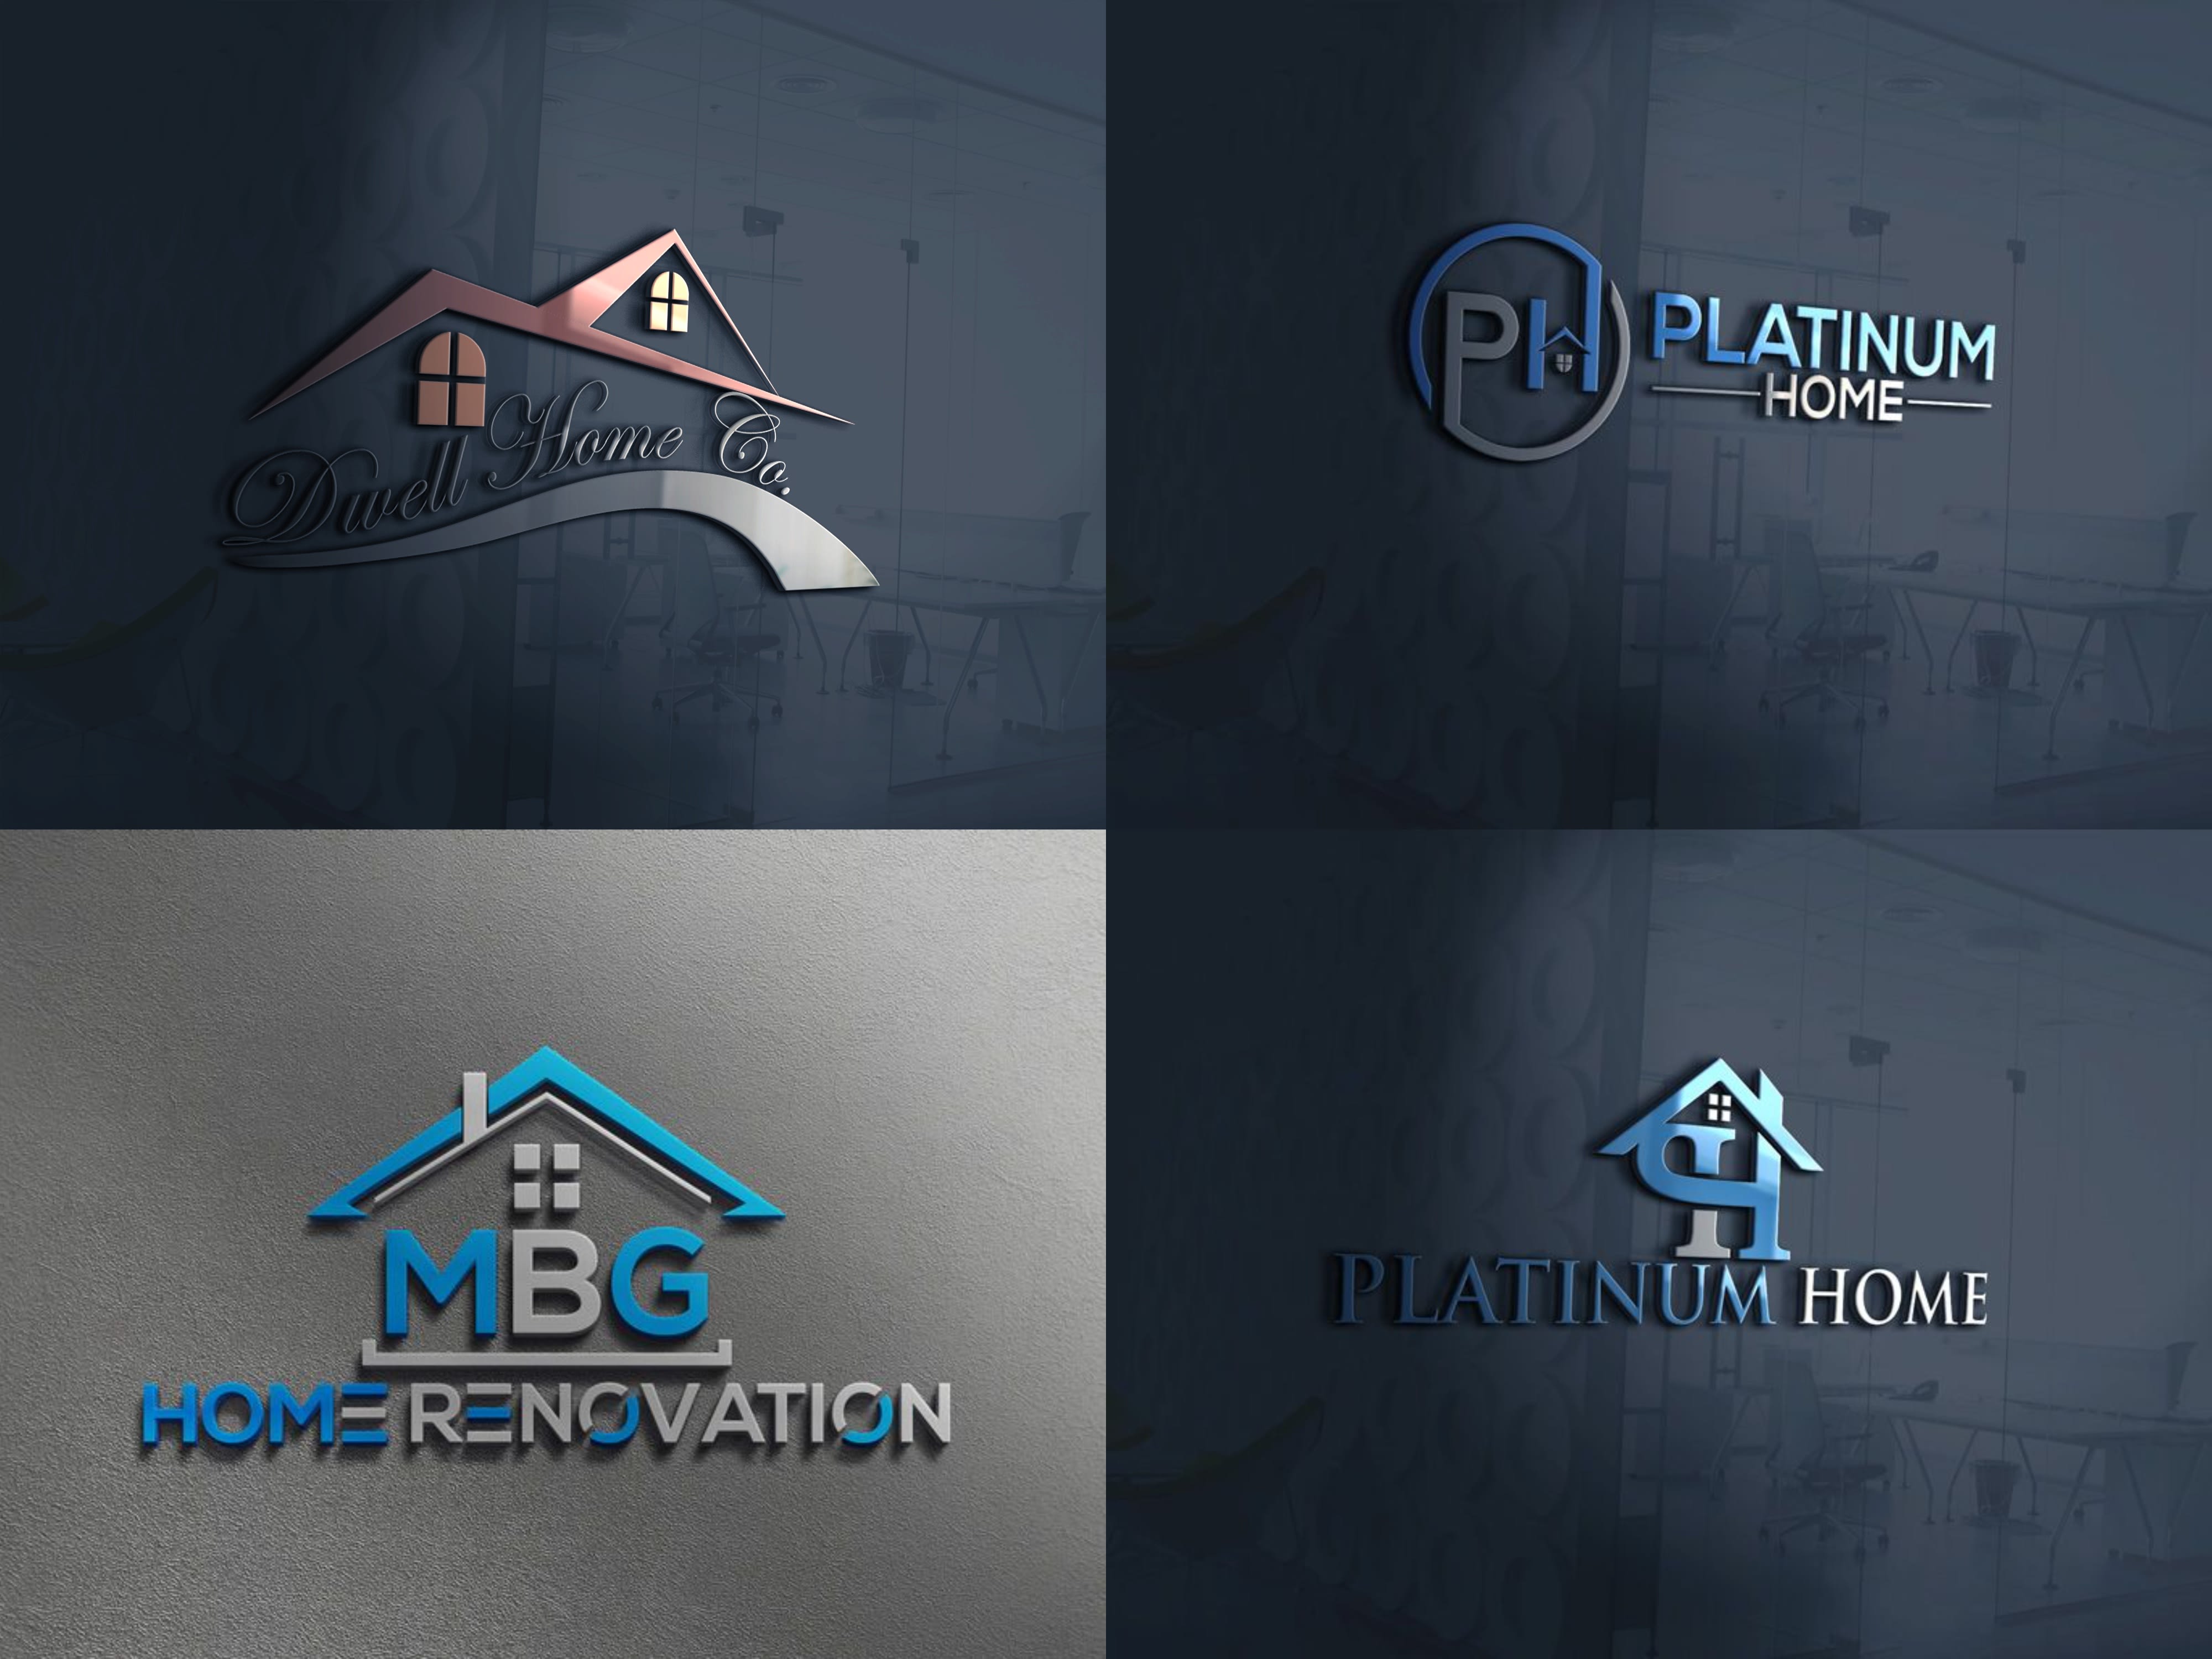 Commissioned LV - retouching defaced logos for that fresh look.  #savedwithpaintbrush #designer #branded